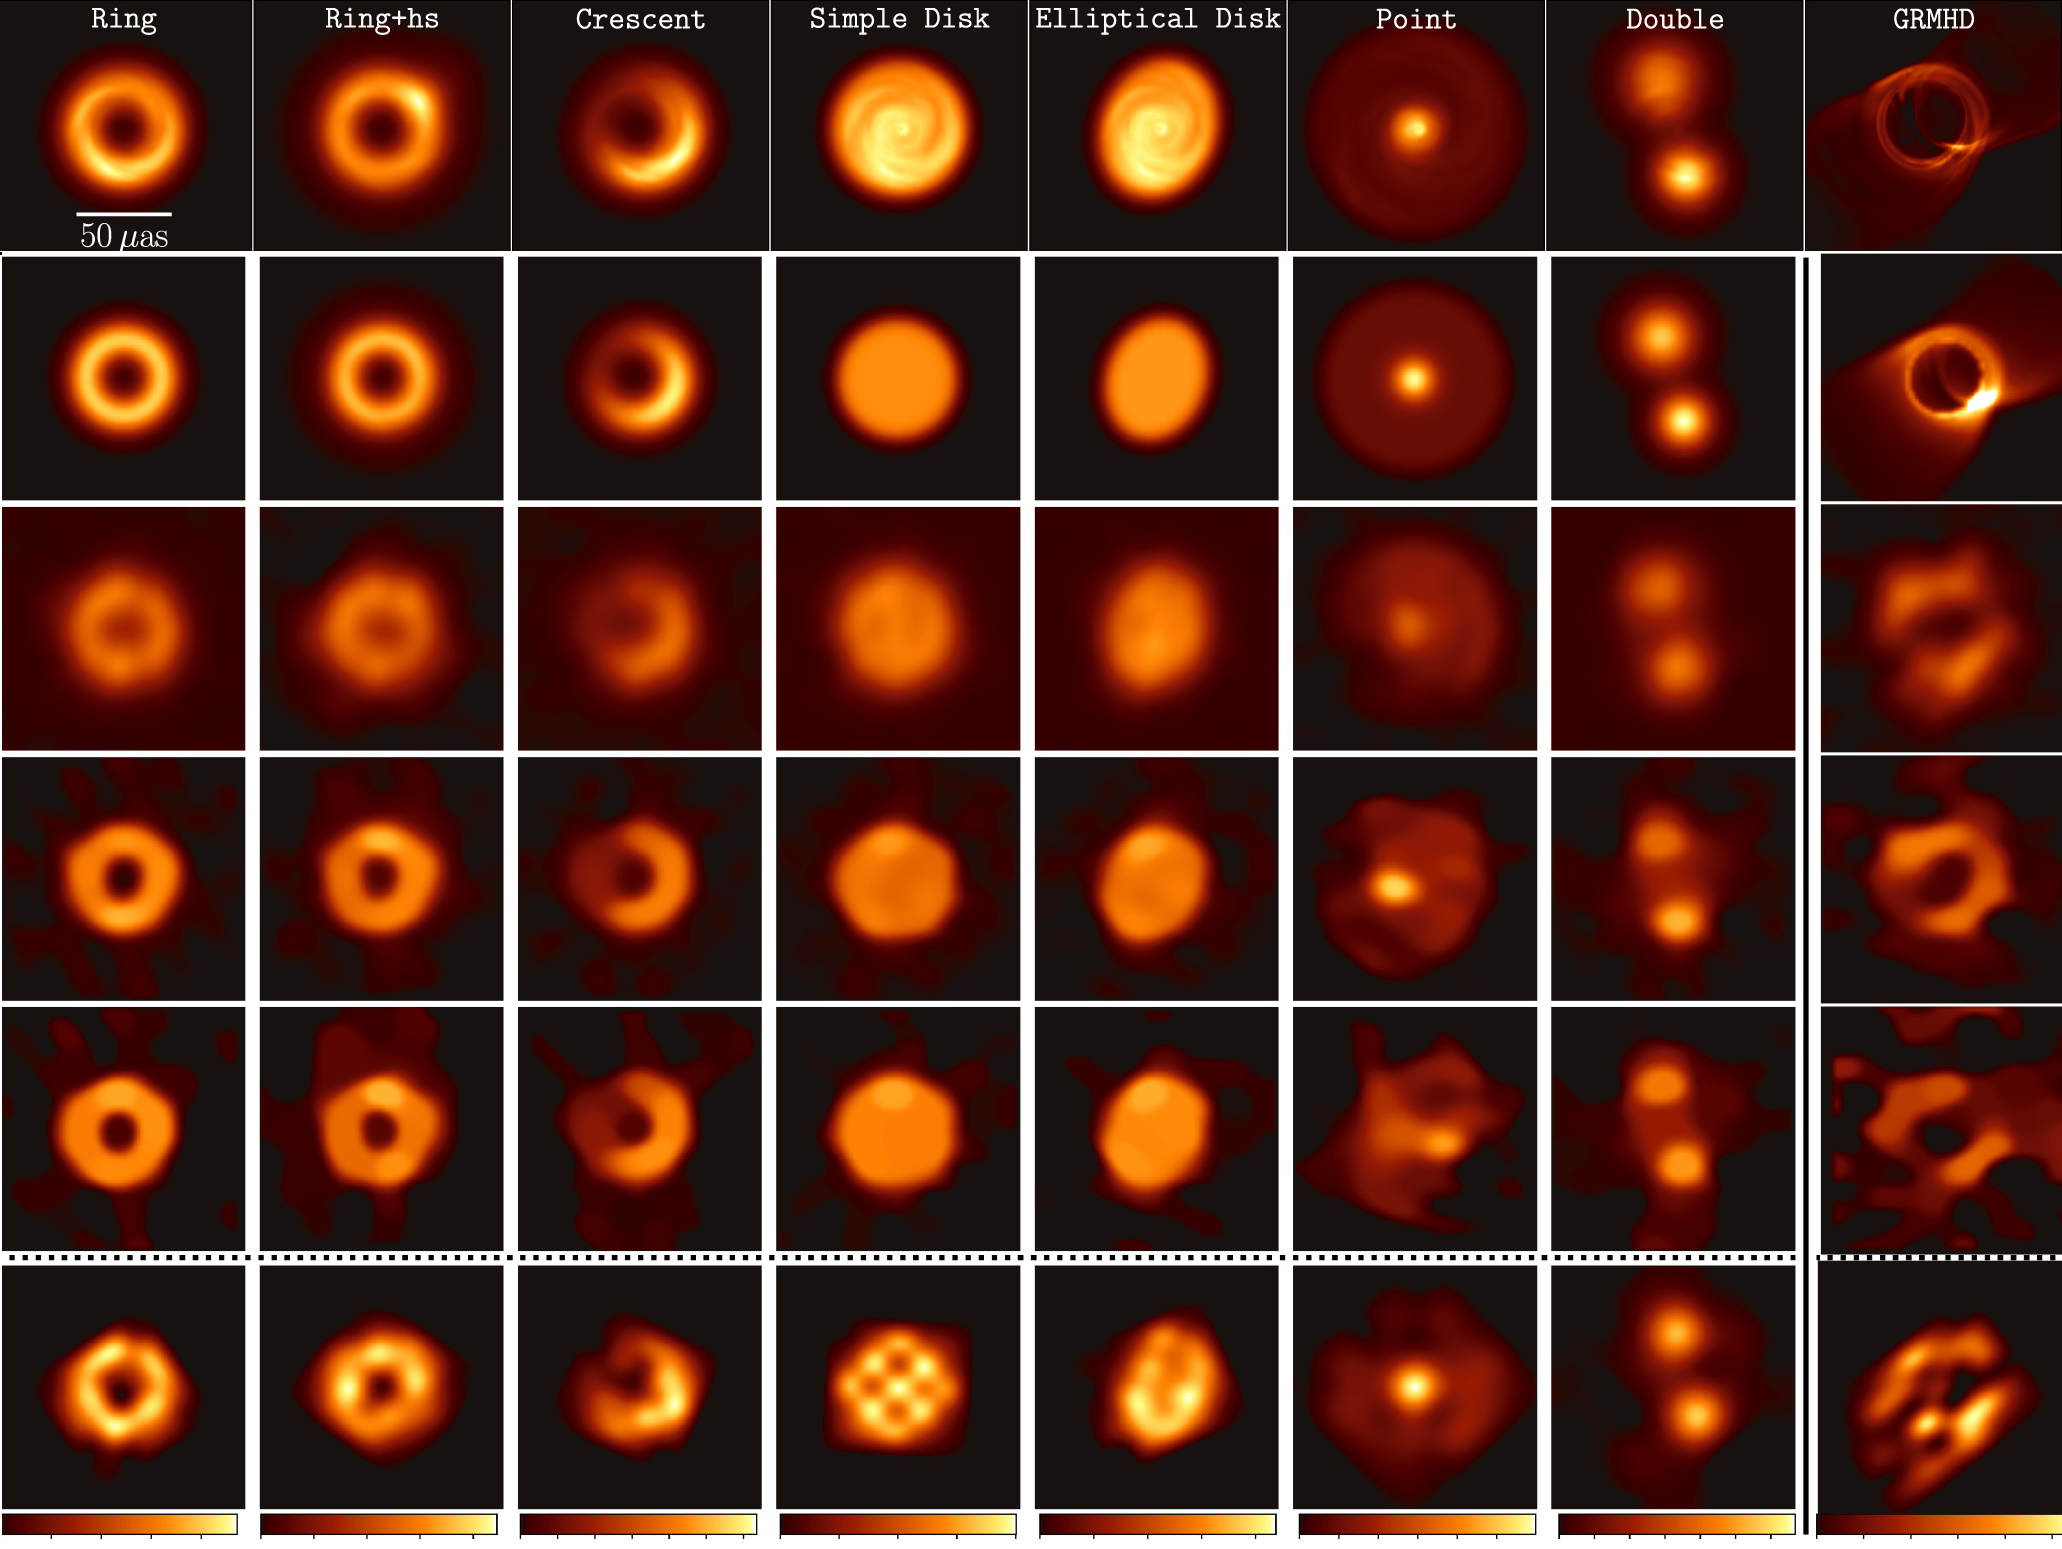 Images of simulated black holes and how their data might appear to sensors on Earth.